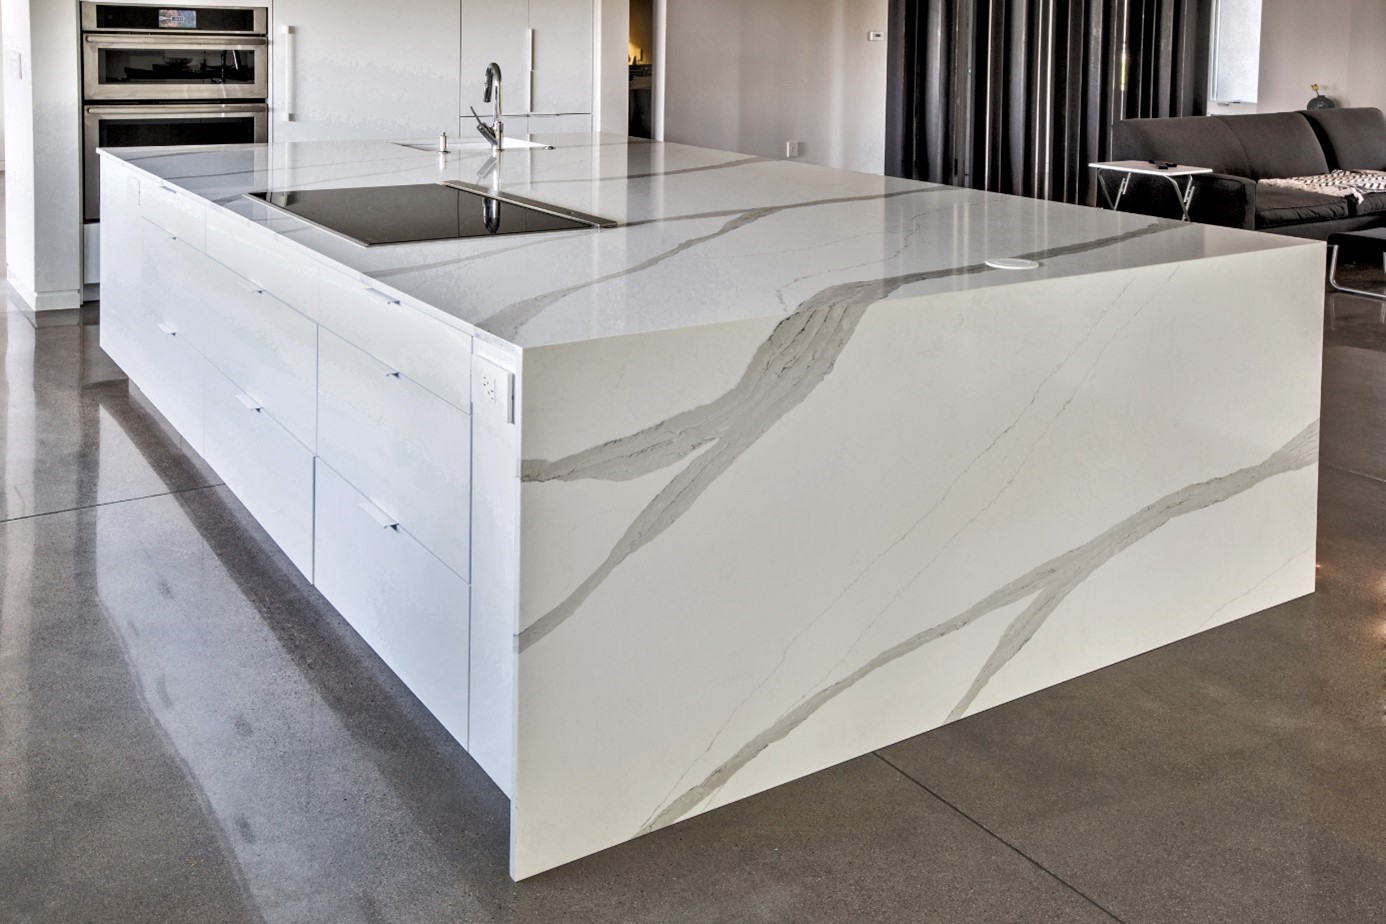 Discover the Beauty and Durability of Granite Kitchen Countertops